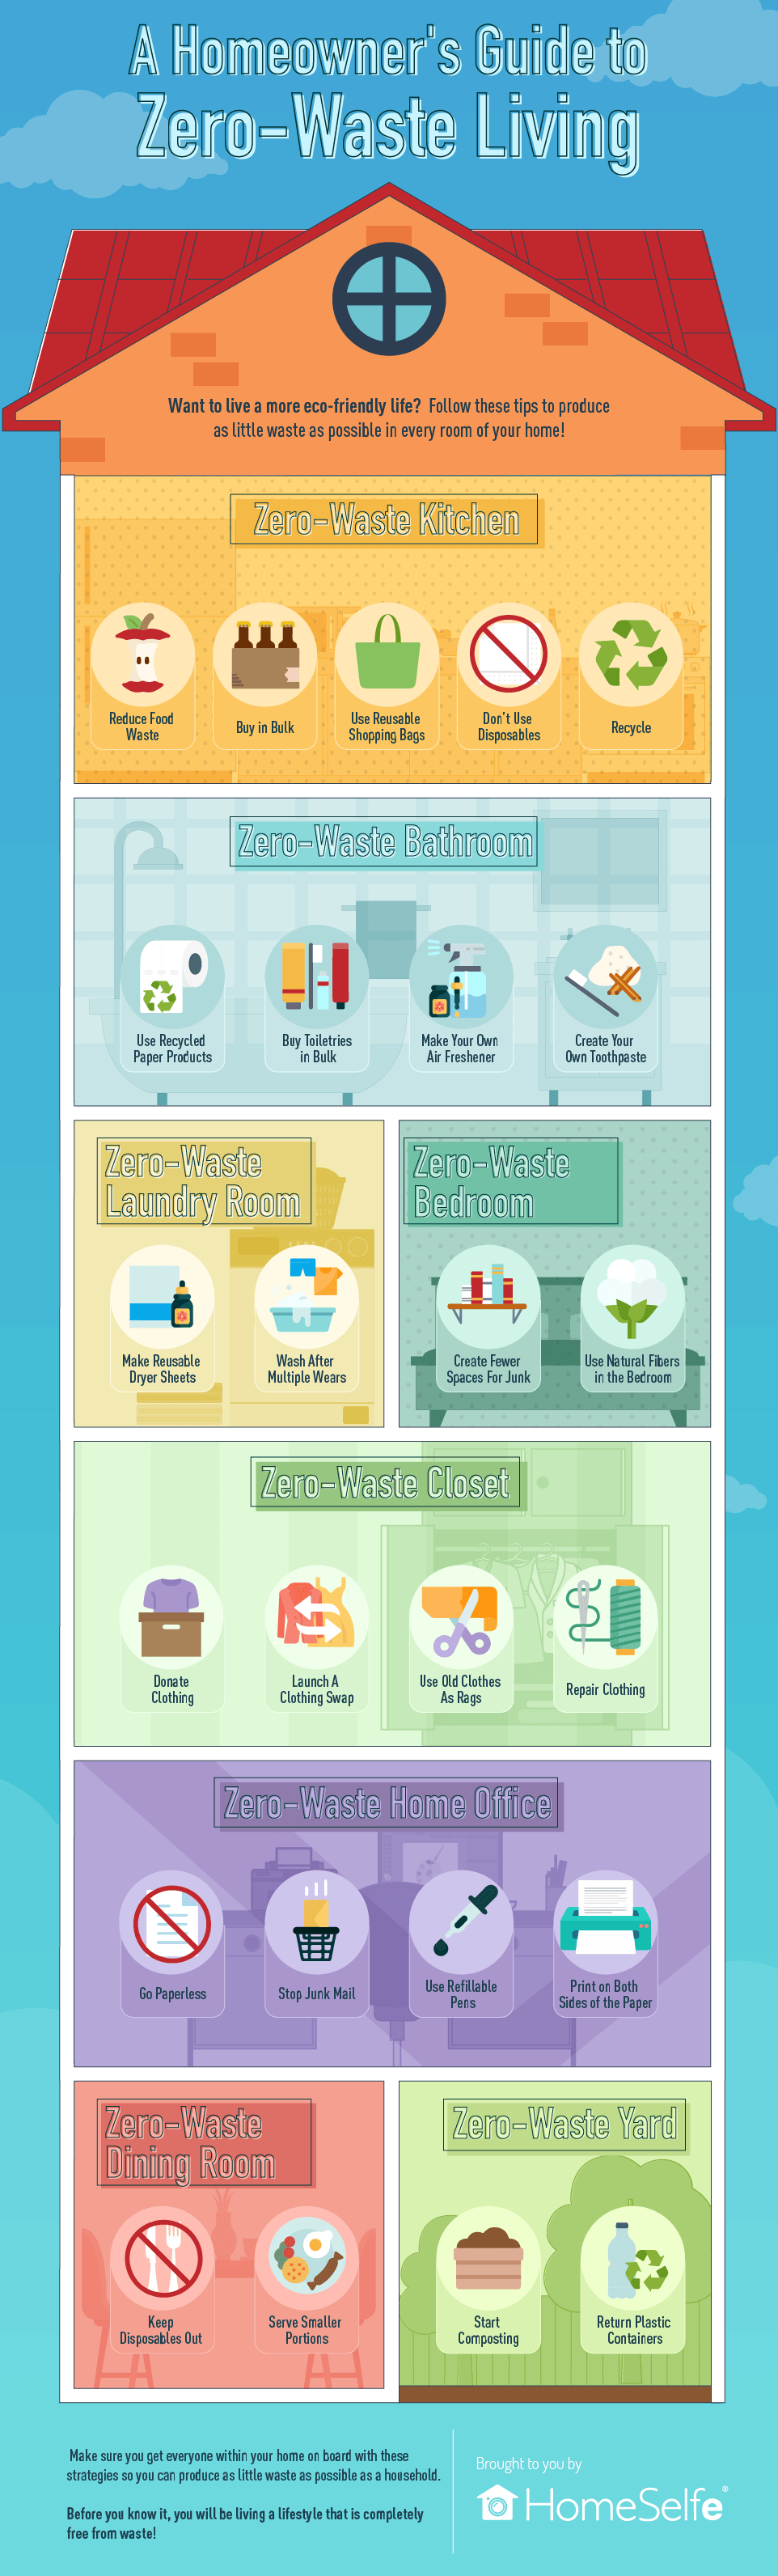 Guide to Zero-Waste Living